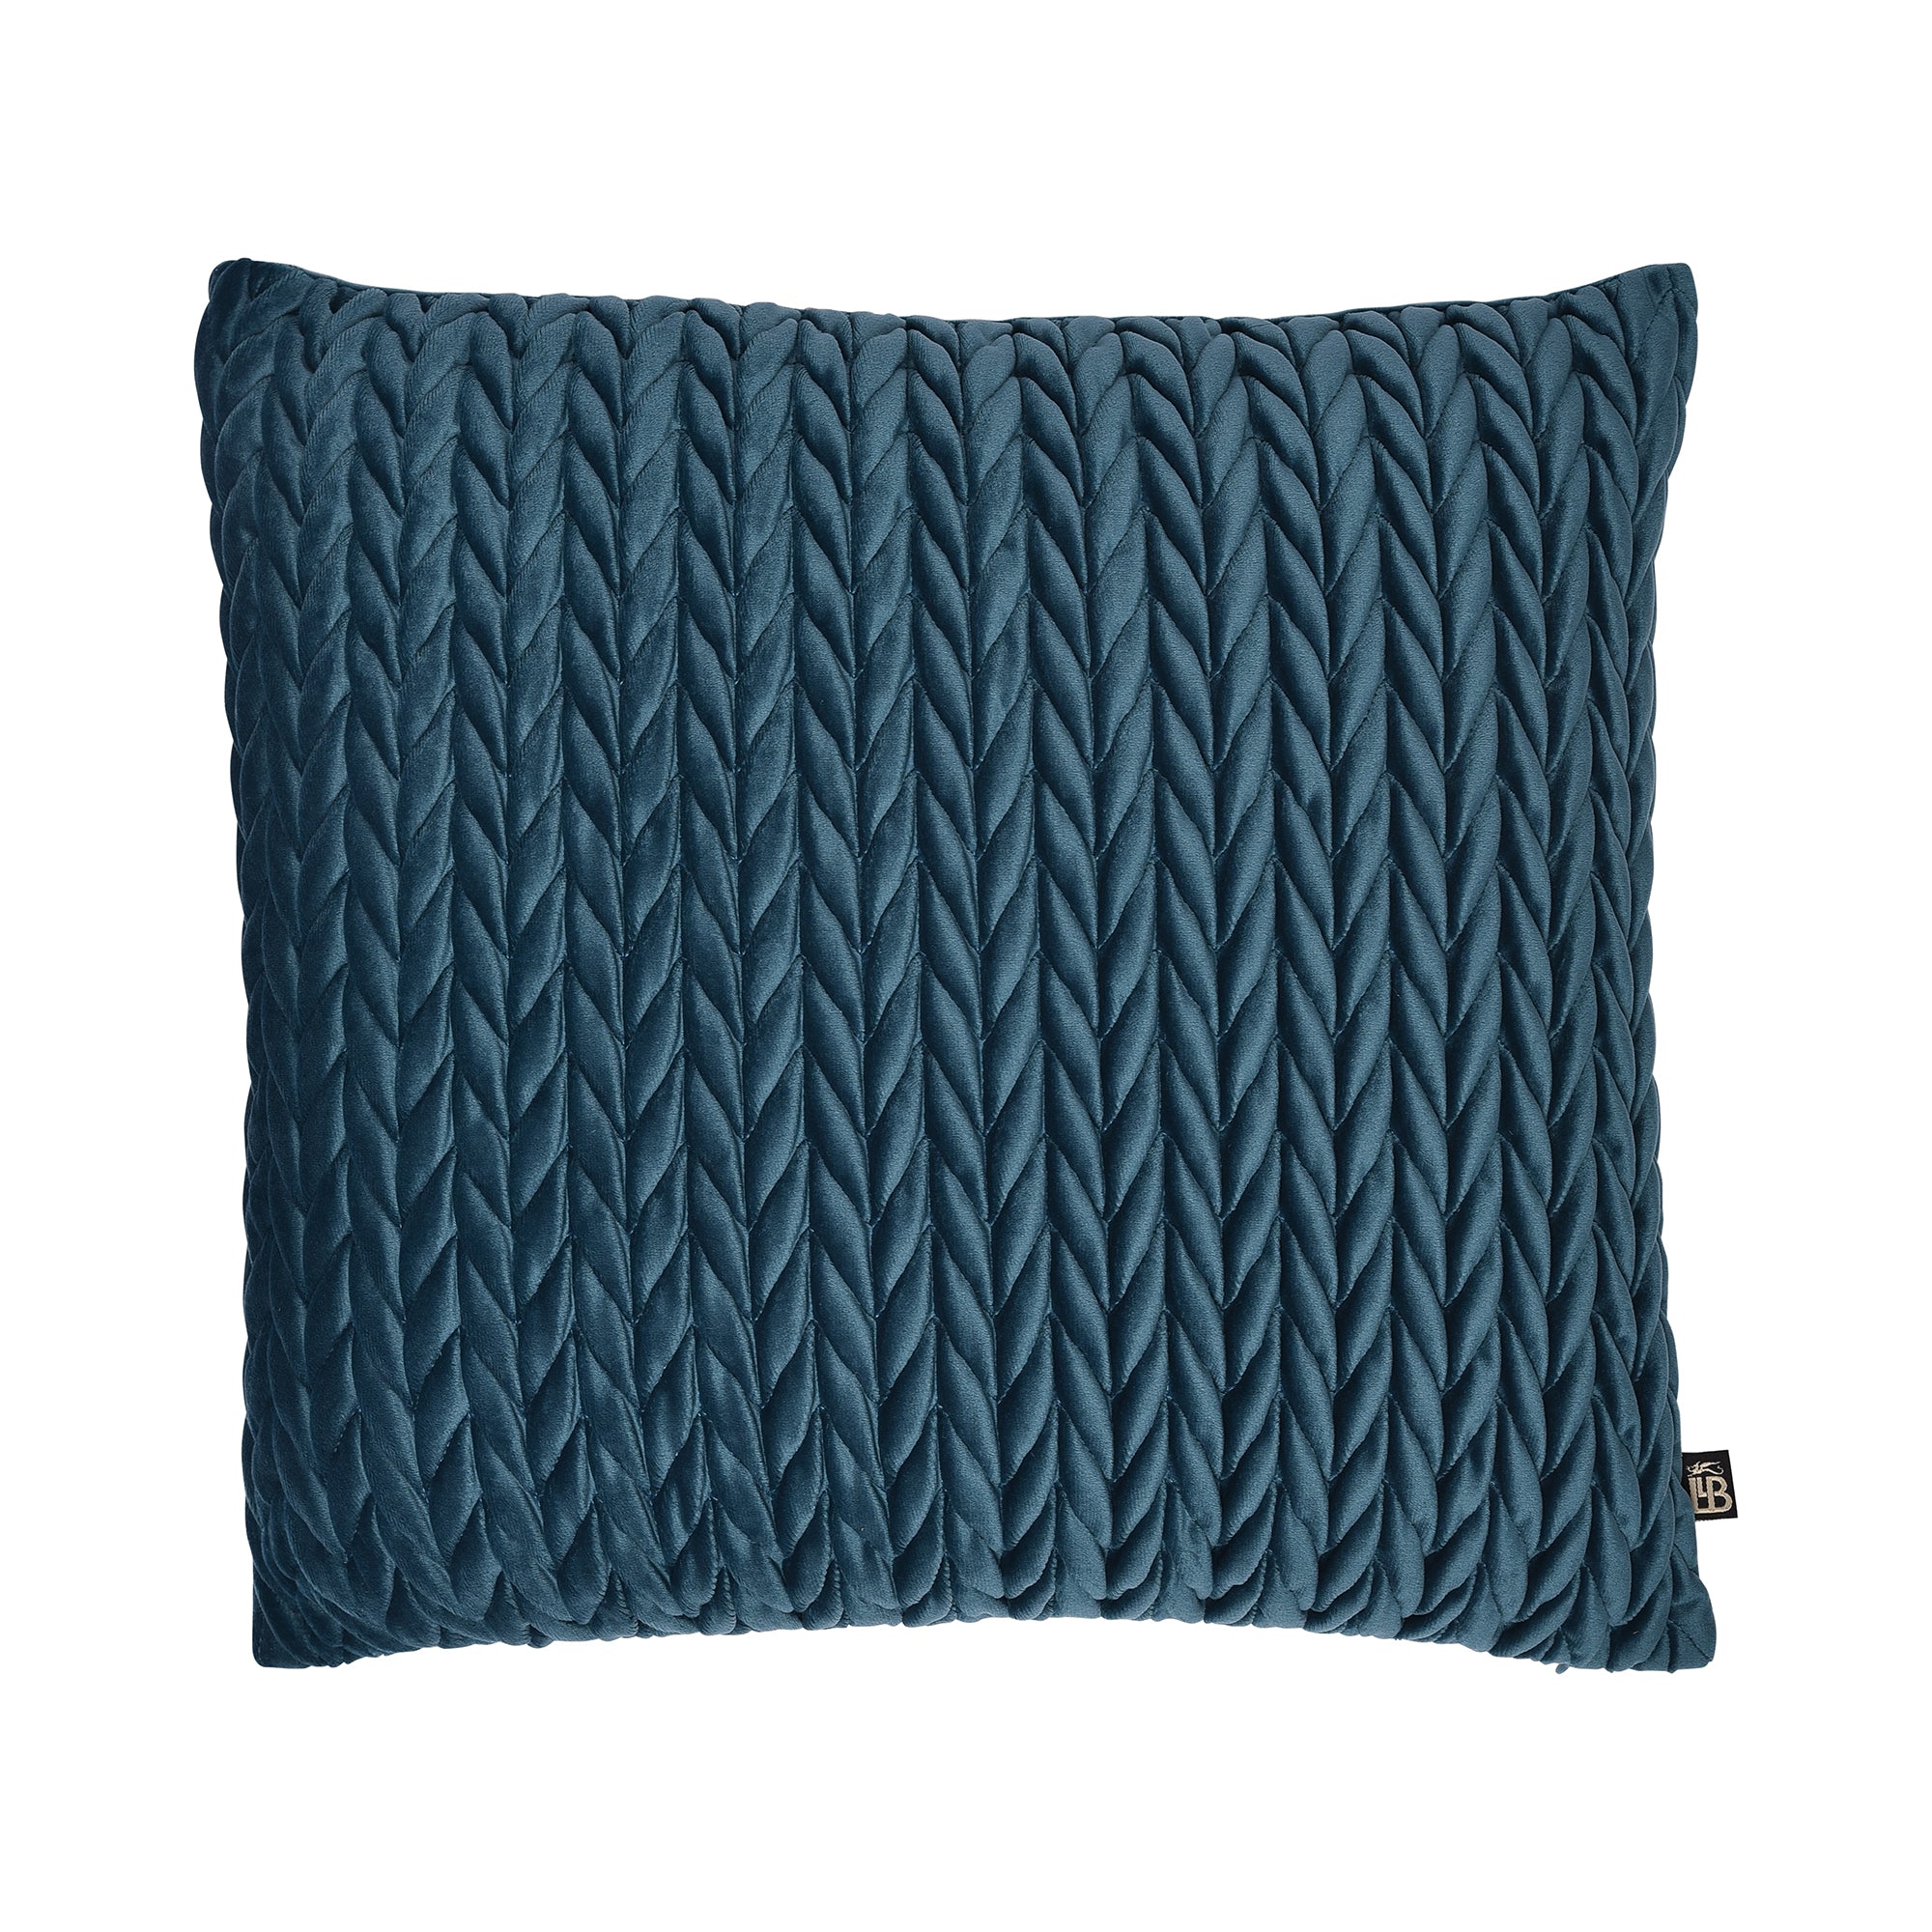 Cushion Cover Amory by Laurence Llewelyn-Bowen in Teal